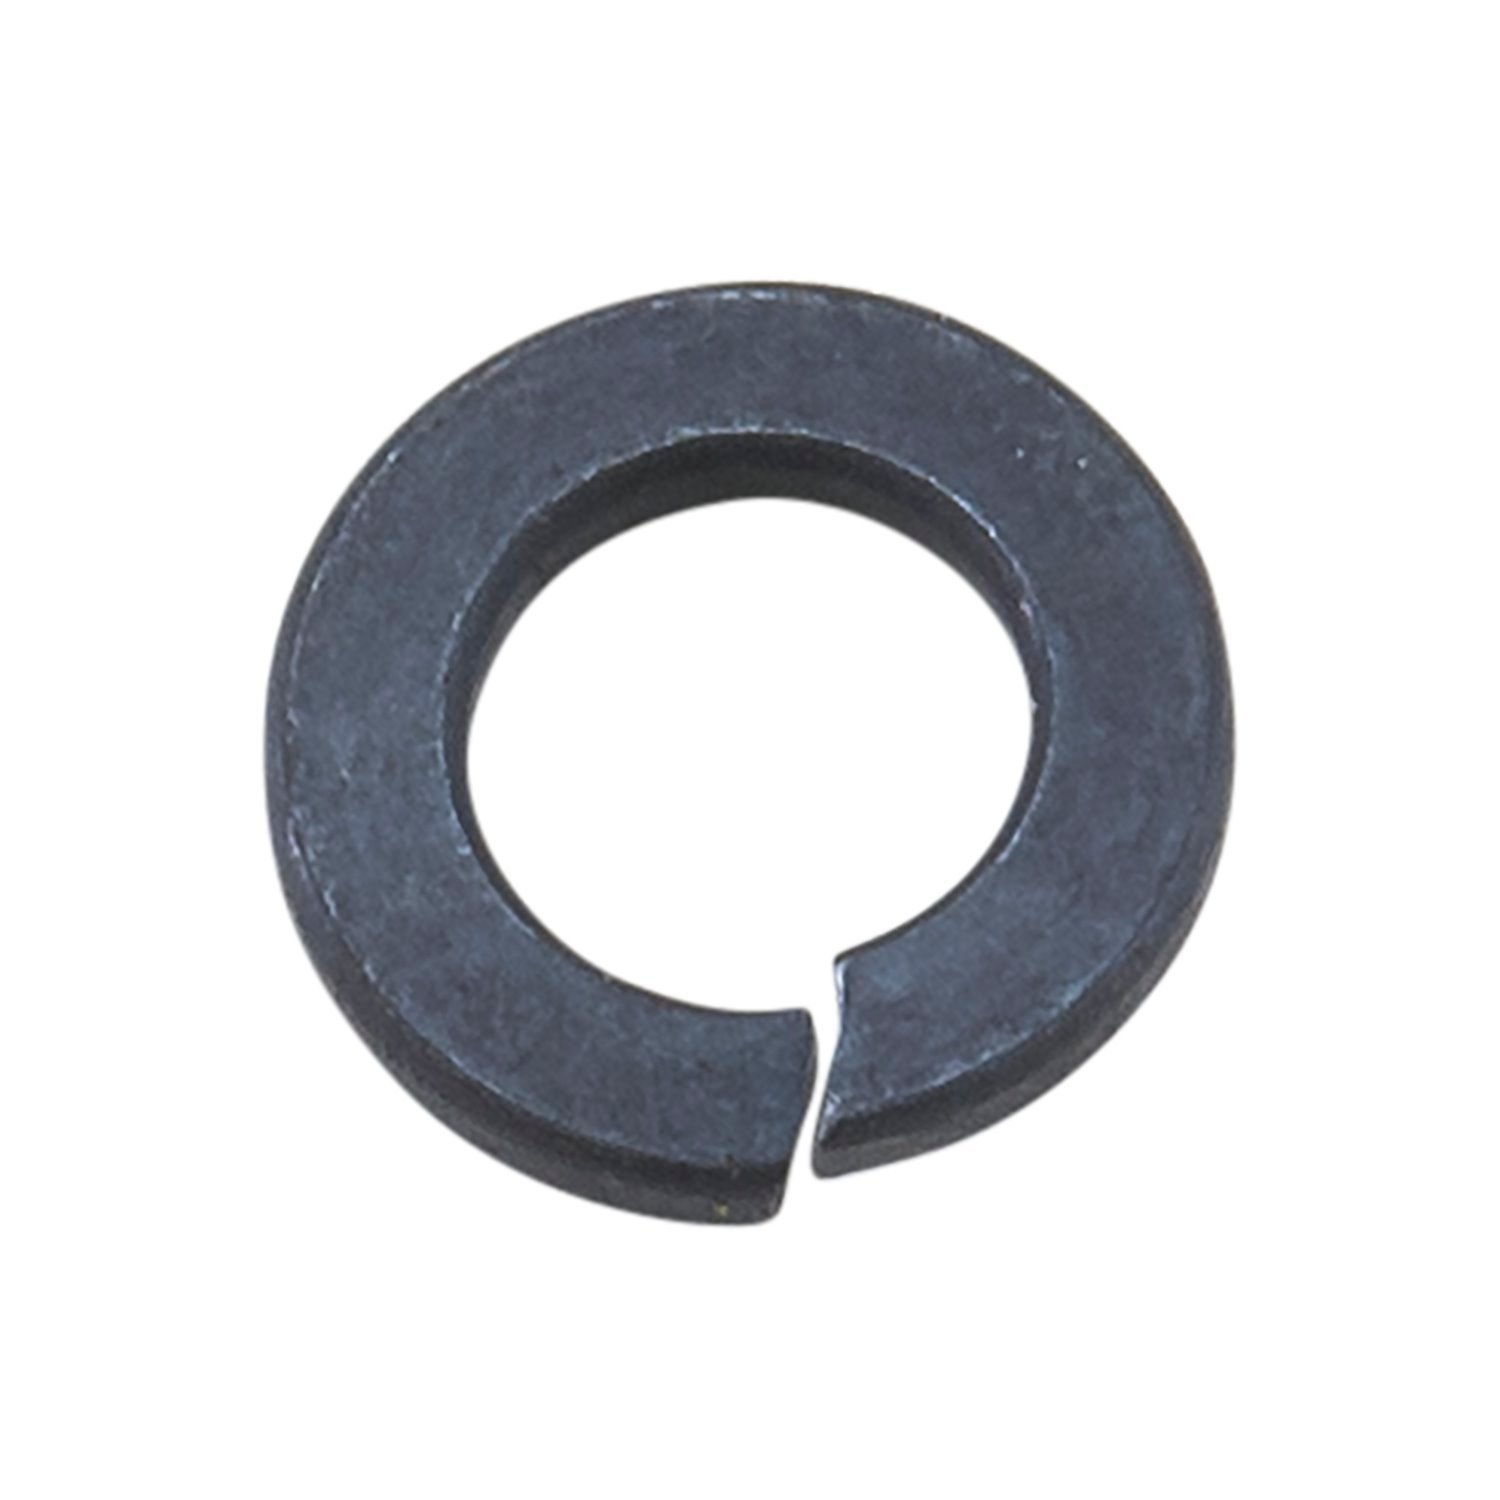 3/8 in. Ring Gear Bolt Washer For GM 12 Bolt Car & Truck, 8.2 Bop & More